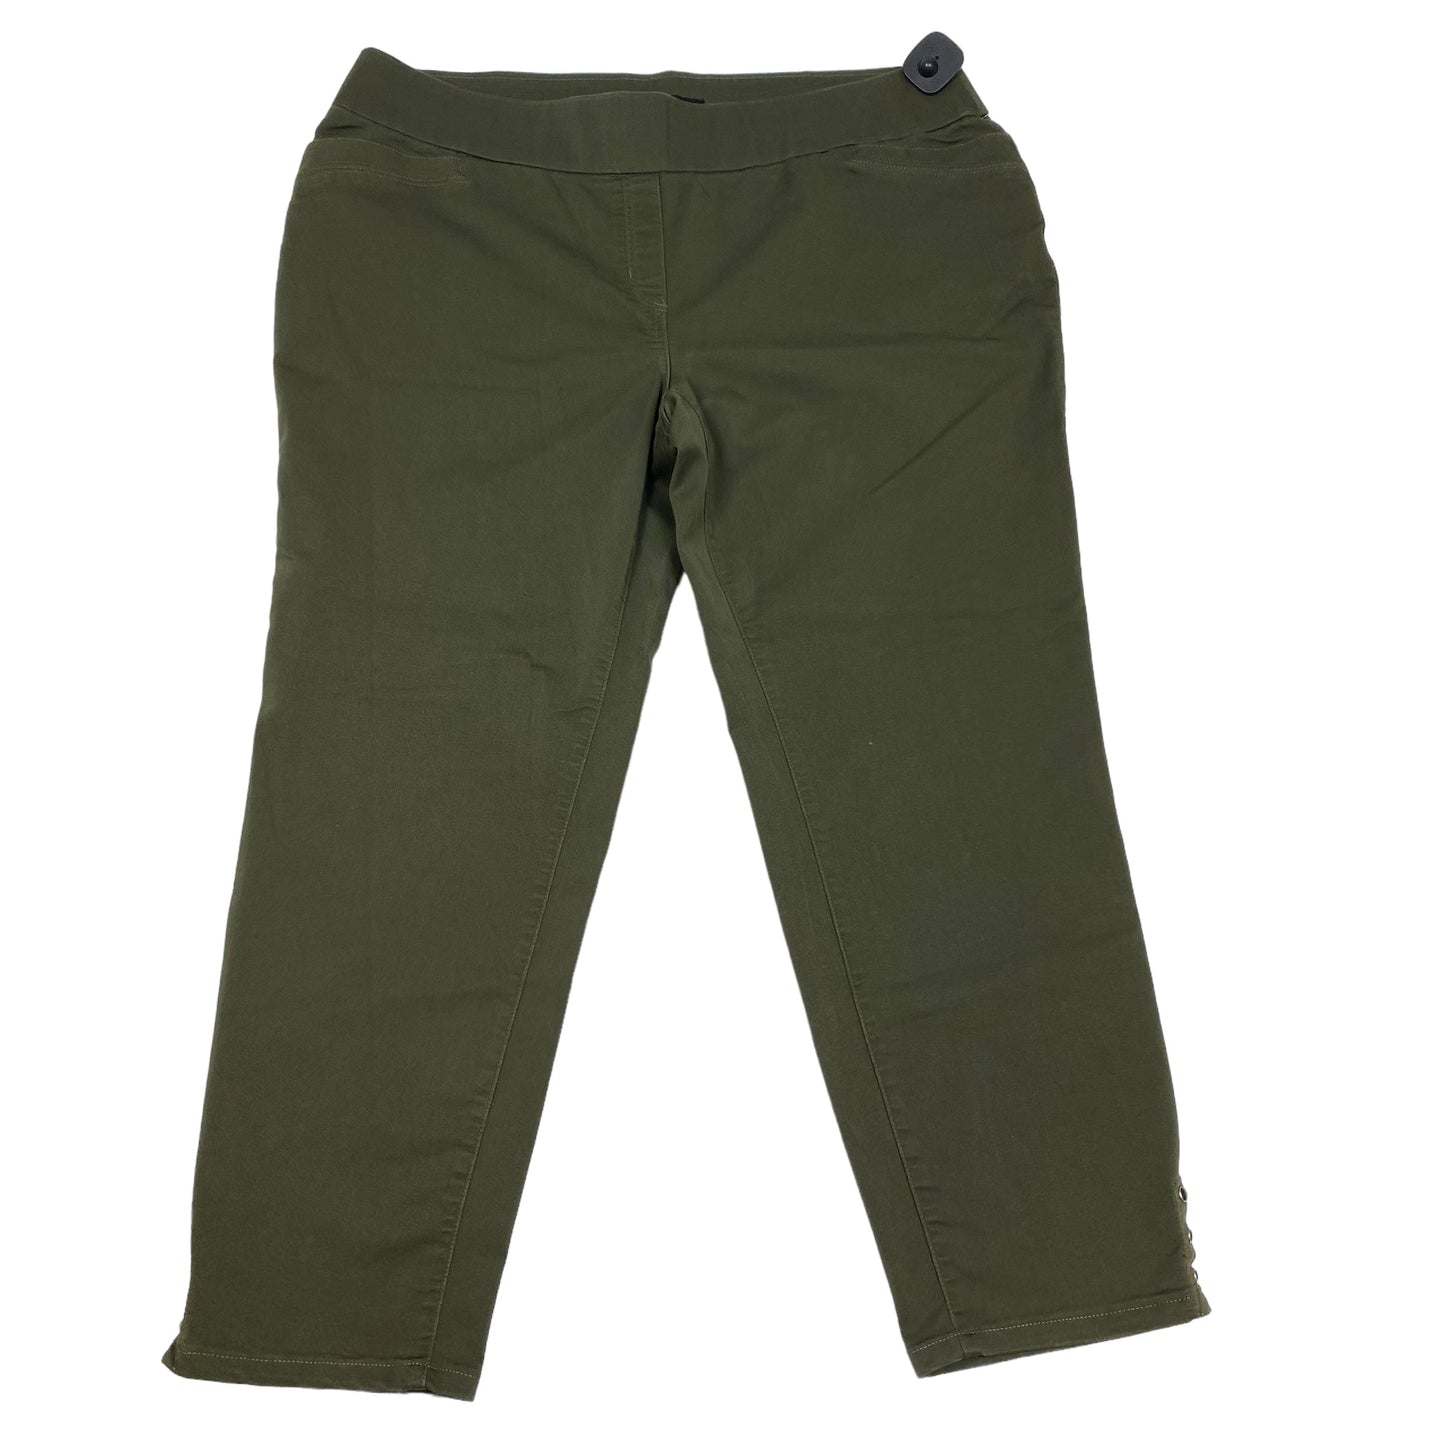 Green Pants Other Briggs, Size 18